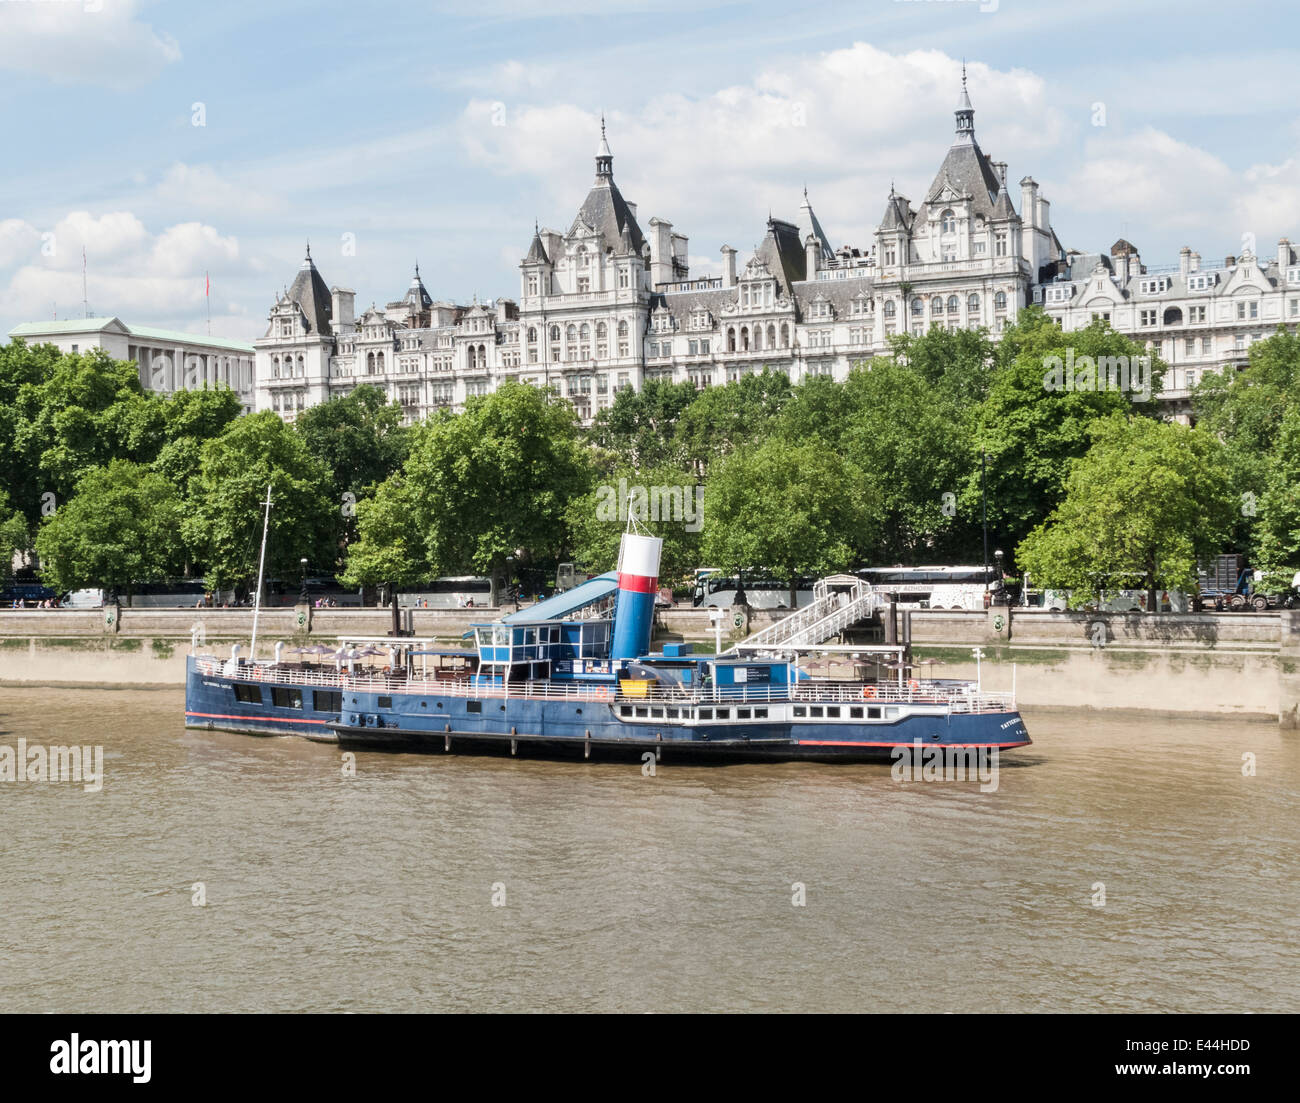 Tattershall Castle, a ship moored in front of Whitehall on the Victoria Embankment, London used as a restaurant and bar Stock Photo